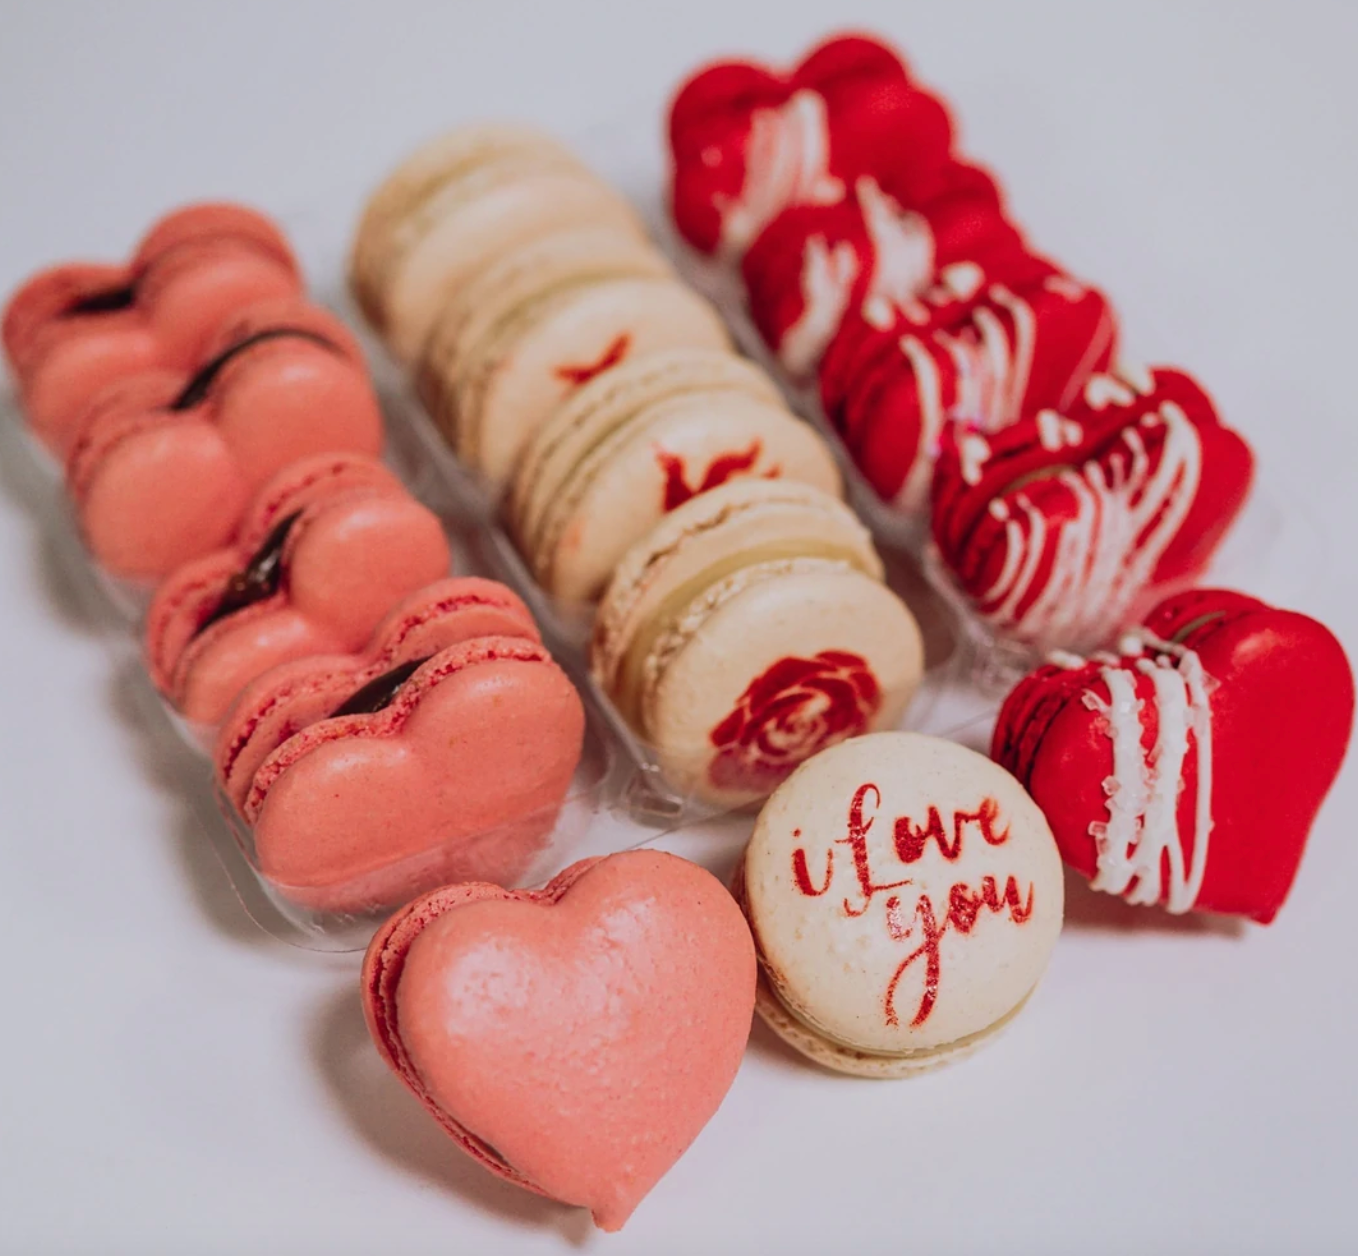 assortment of heart shaped and printed macarons